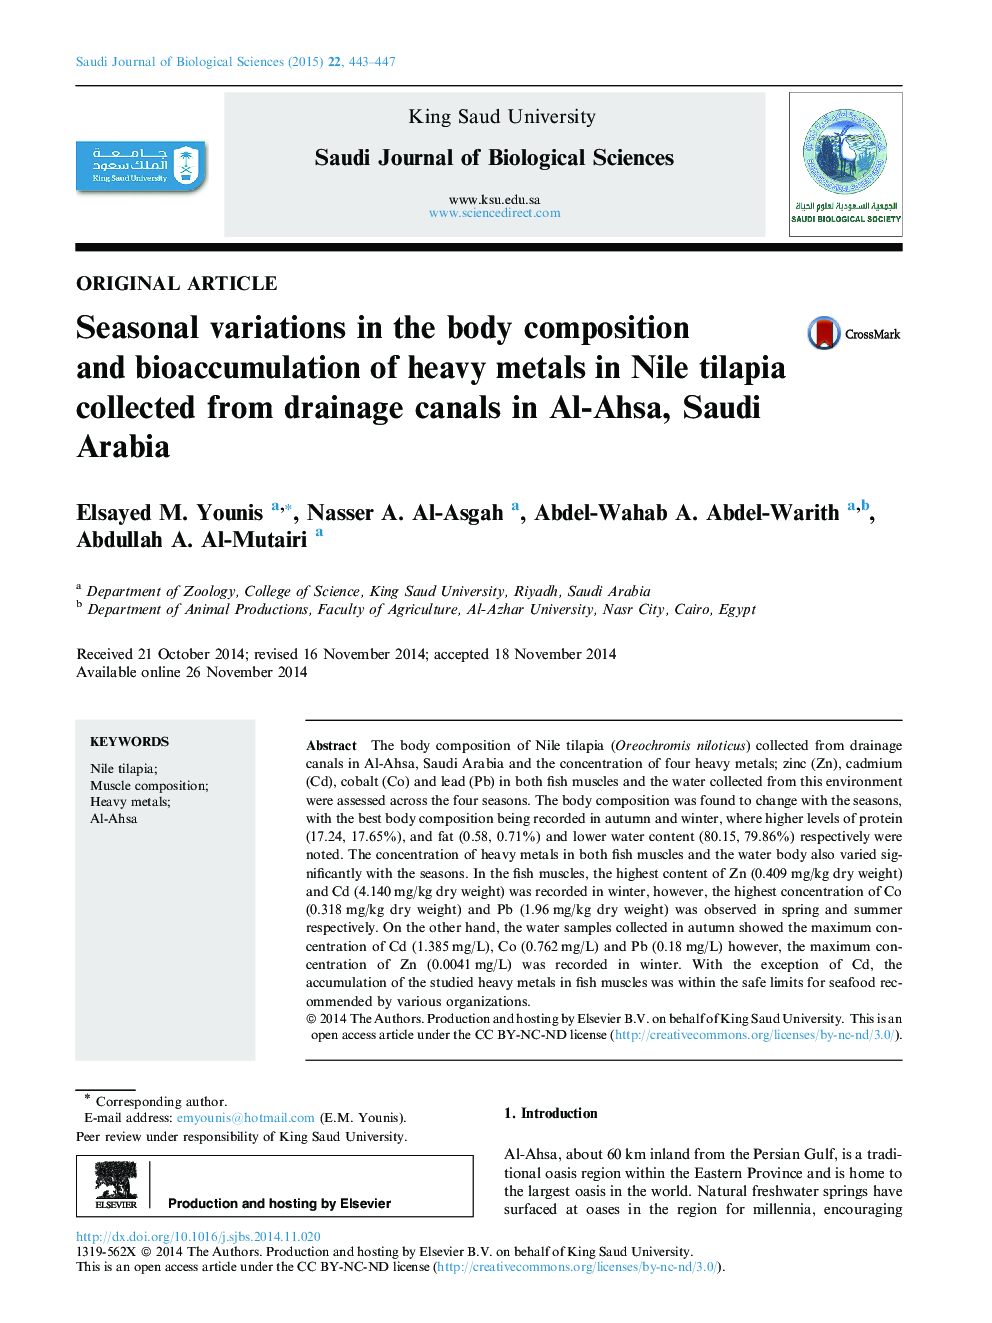 Seasonal variations in the body composition and bioaccumulation of heavy metals in Nile tilapia collected from drainage canals in Al-Ahsa, Saudi Arabia 